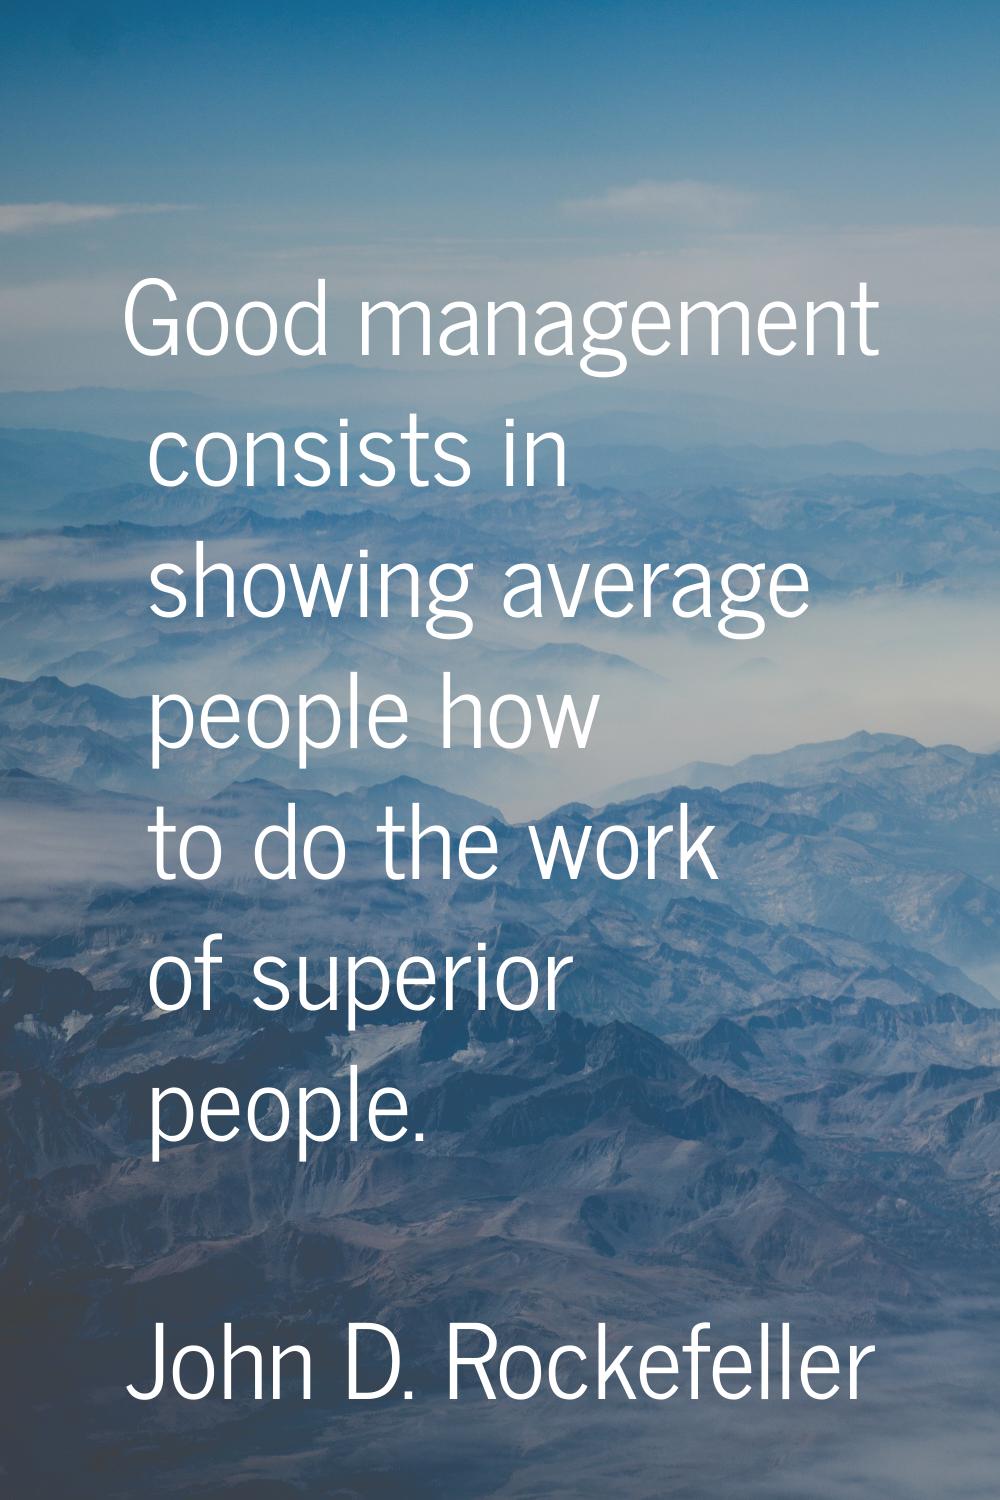 Good management consists in showing average people how to do the work of superior people.